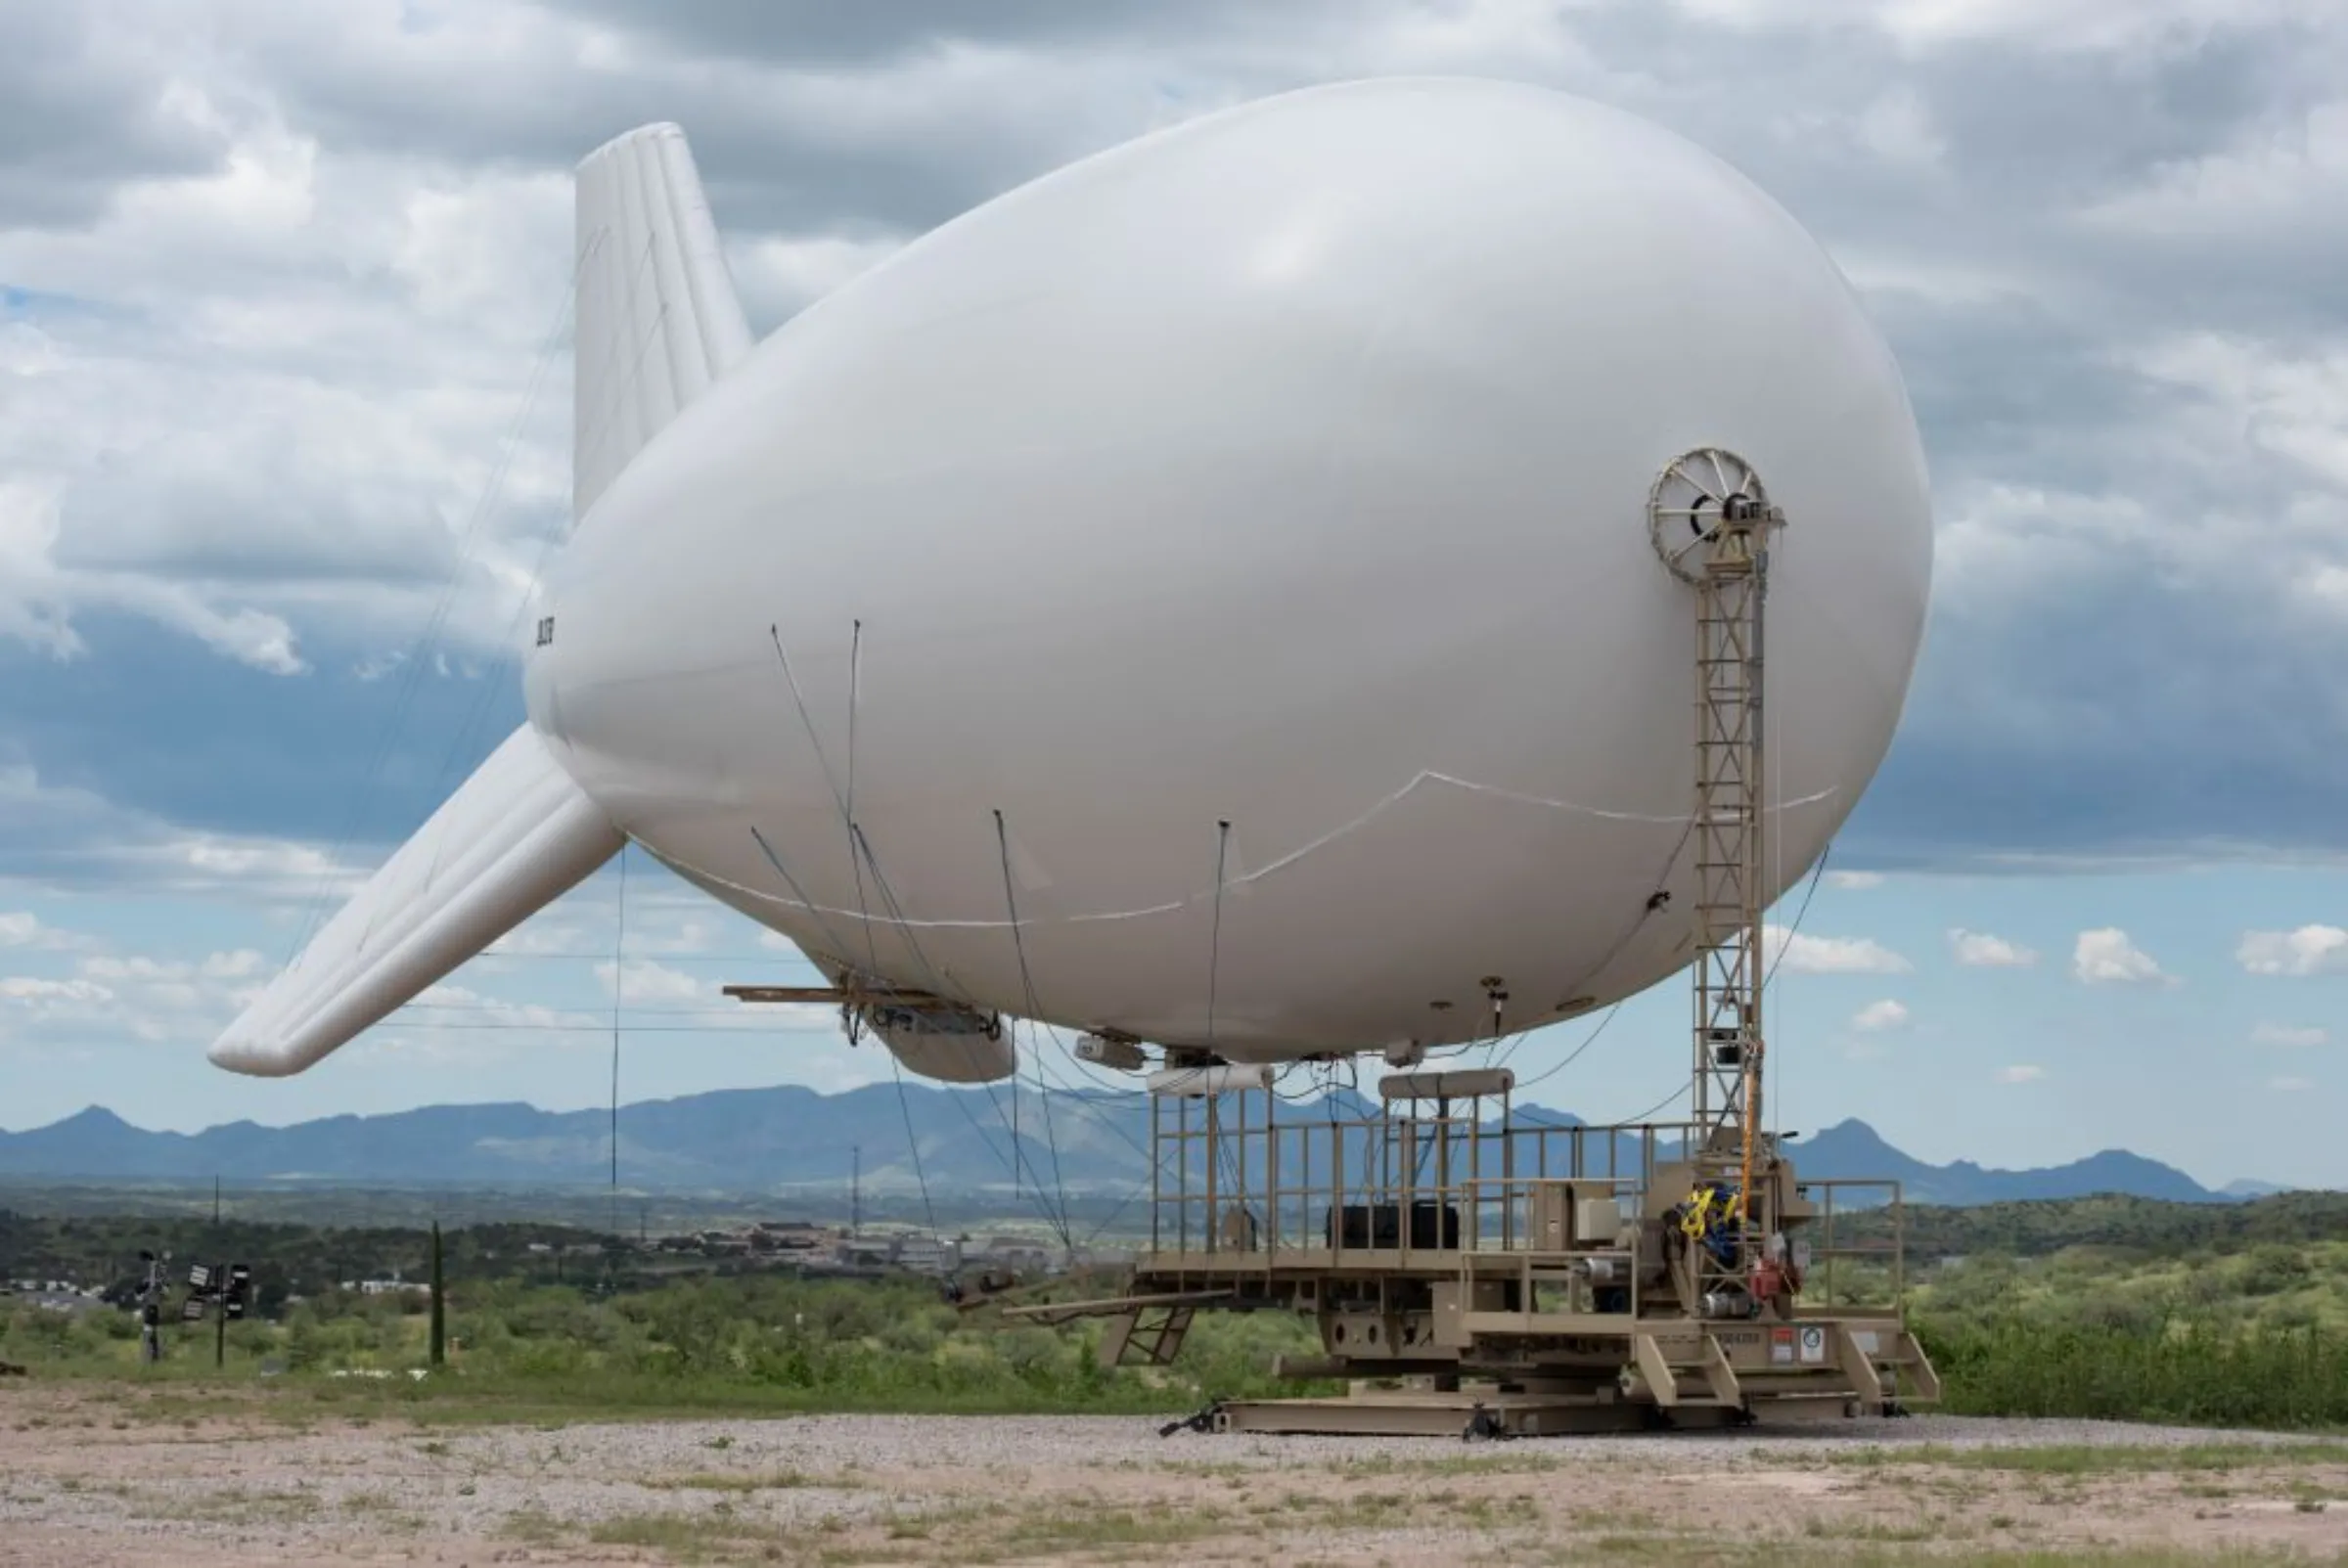 Border Patrol’s newest Tethered Aerostat Radar System is grounded due to weather conditions in Nogales, Arizona, U.S., August 31, 2022